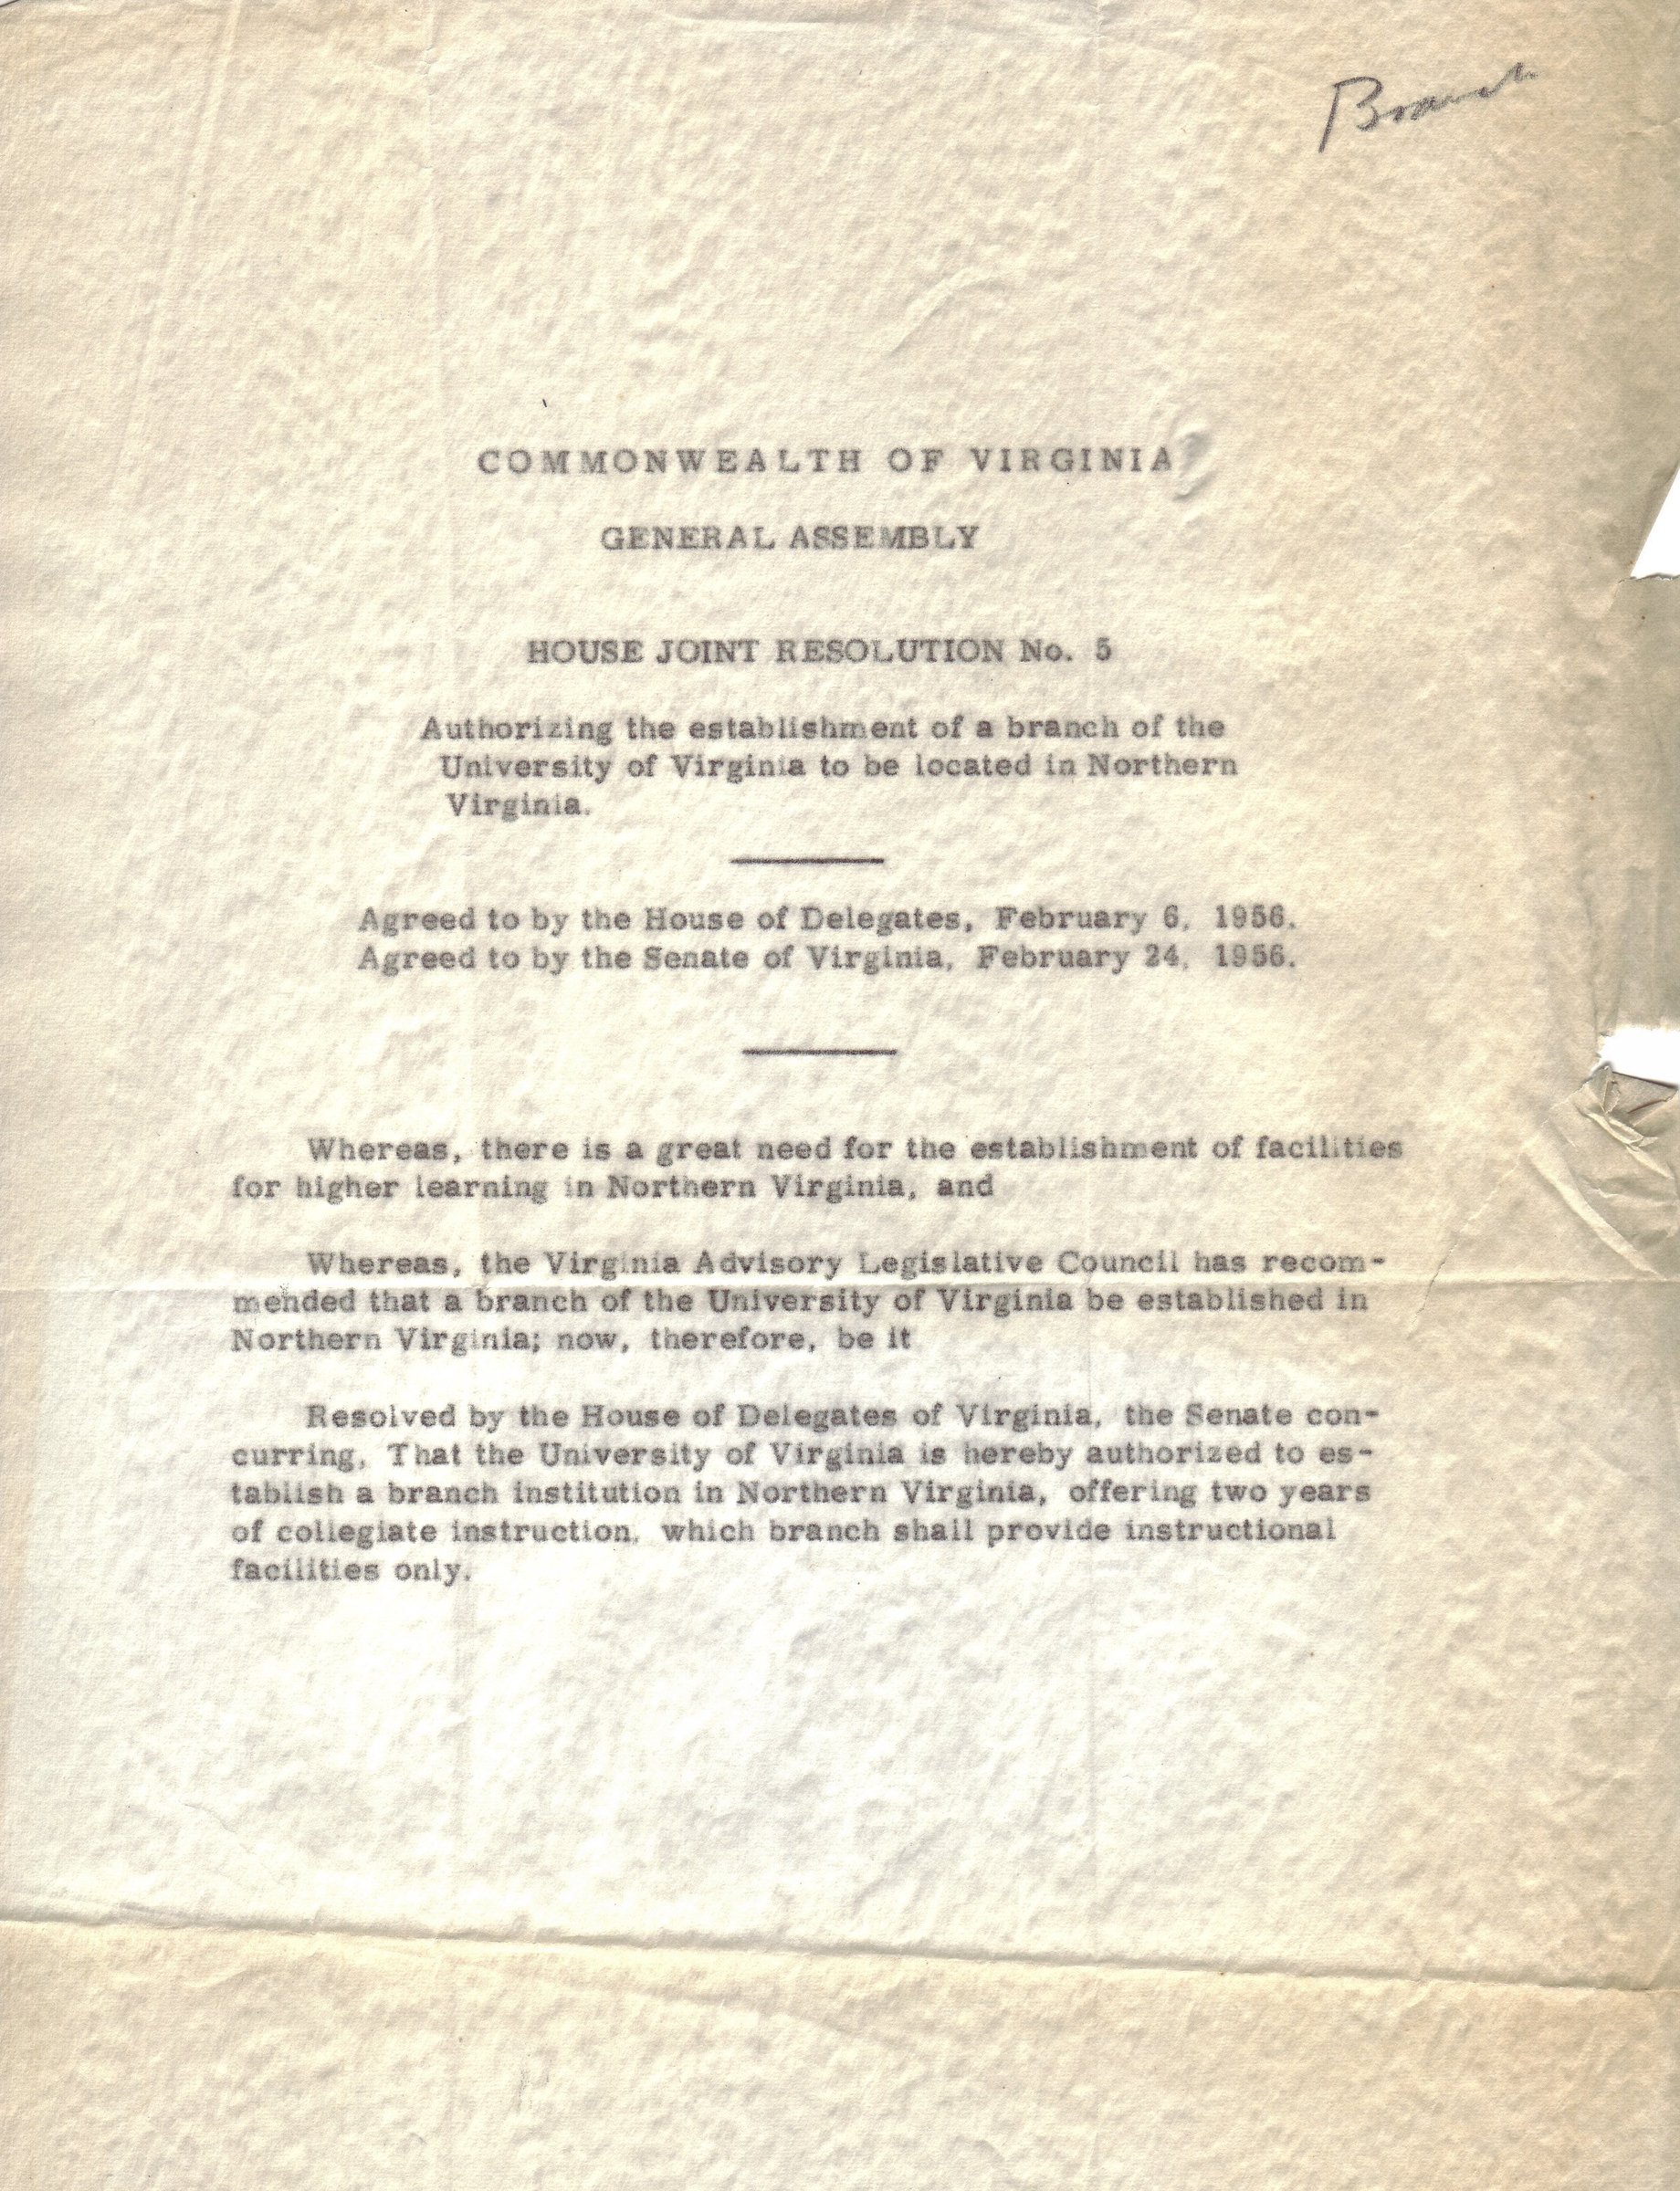 Commonwealth of Virginia: House Joint Resolution #5, February 24, 1956.